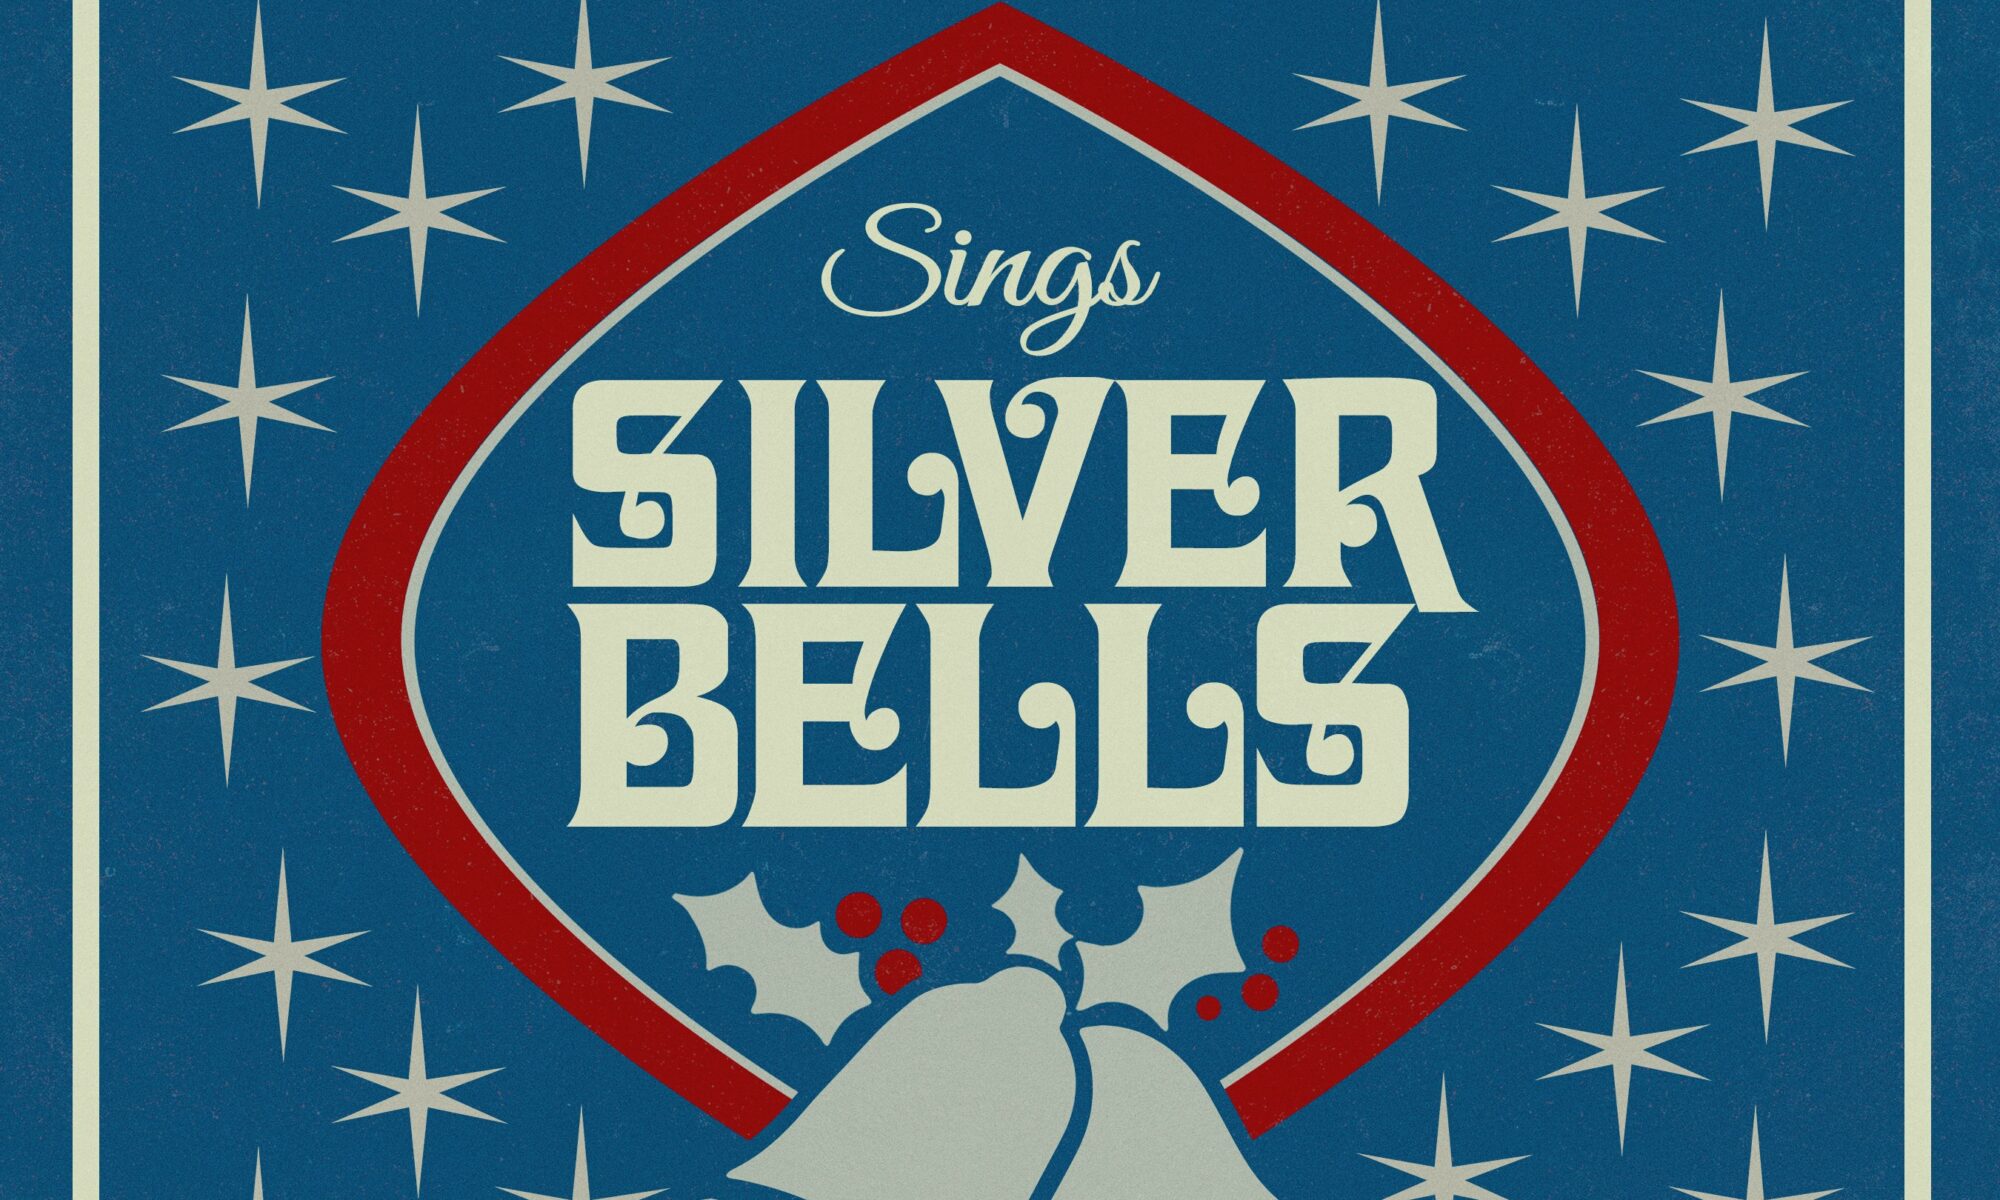 David Myles sings Silver Bells single featuring text in off-white on a blue background with holly, bells and stars